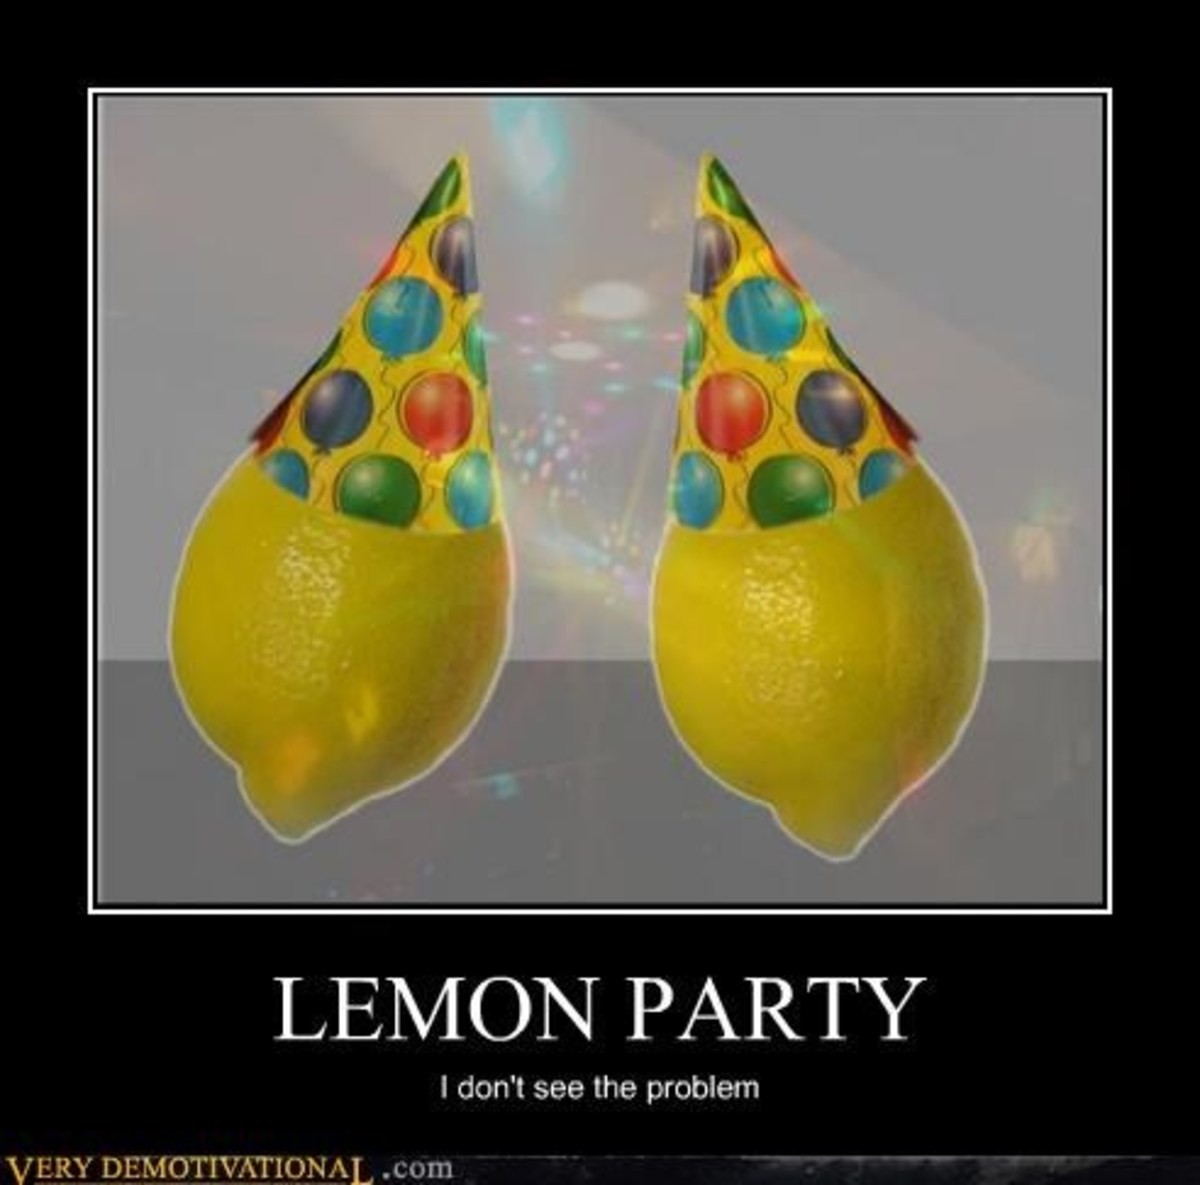 The only lemon party I judge is a Don Lemon party. 